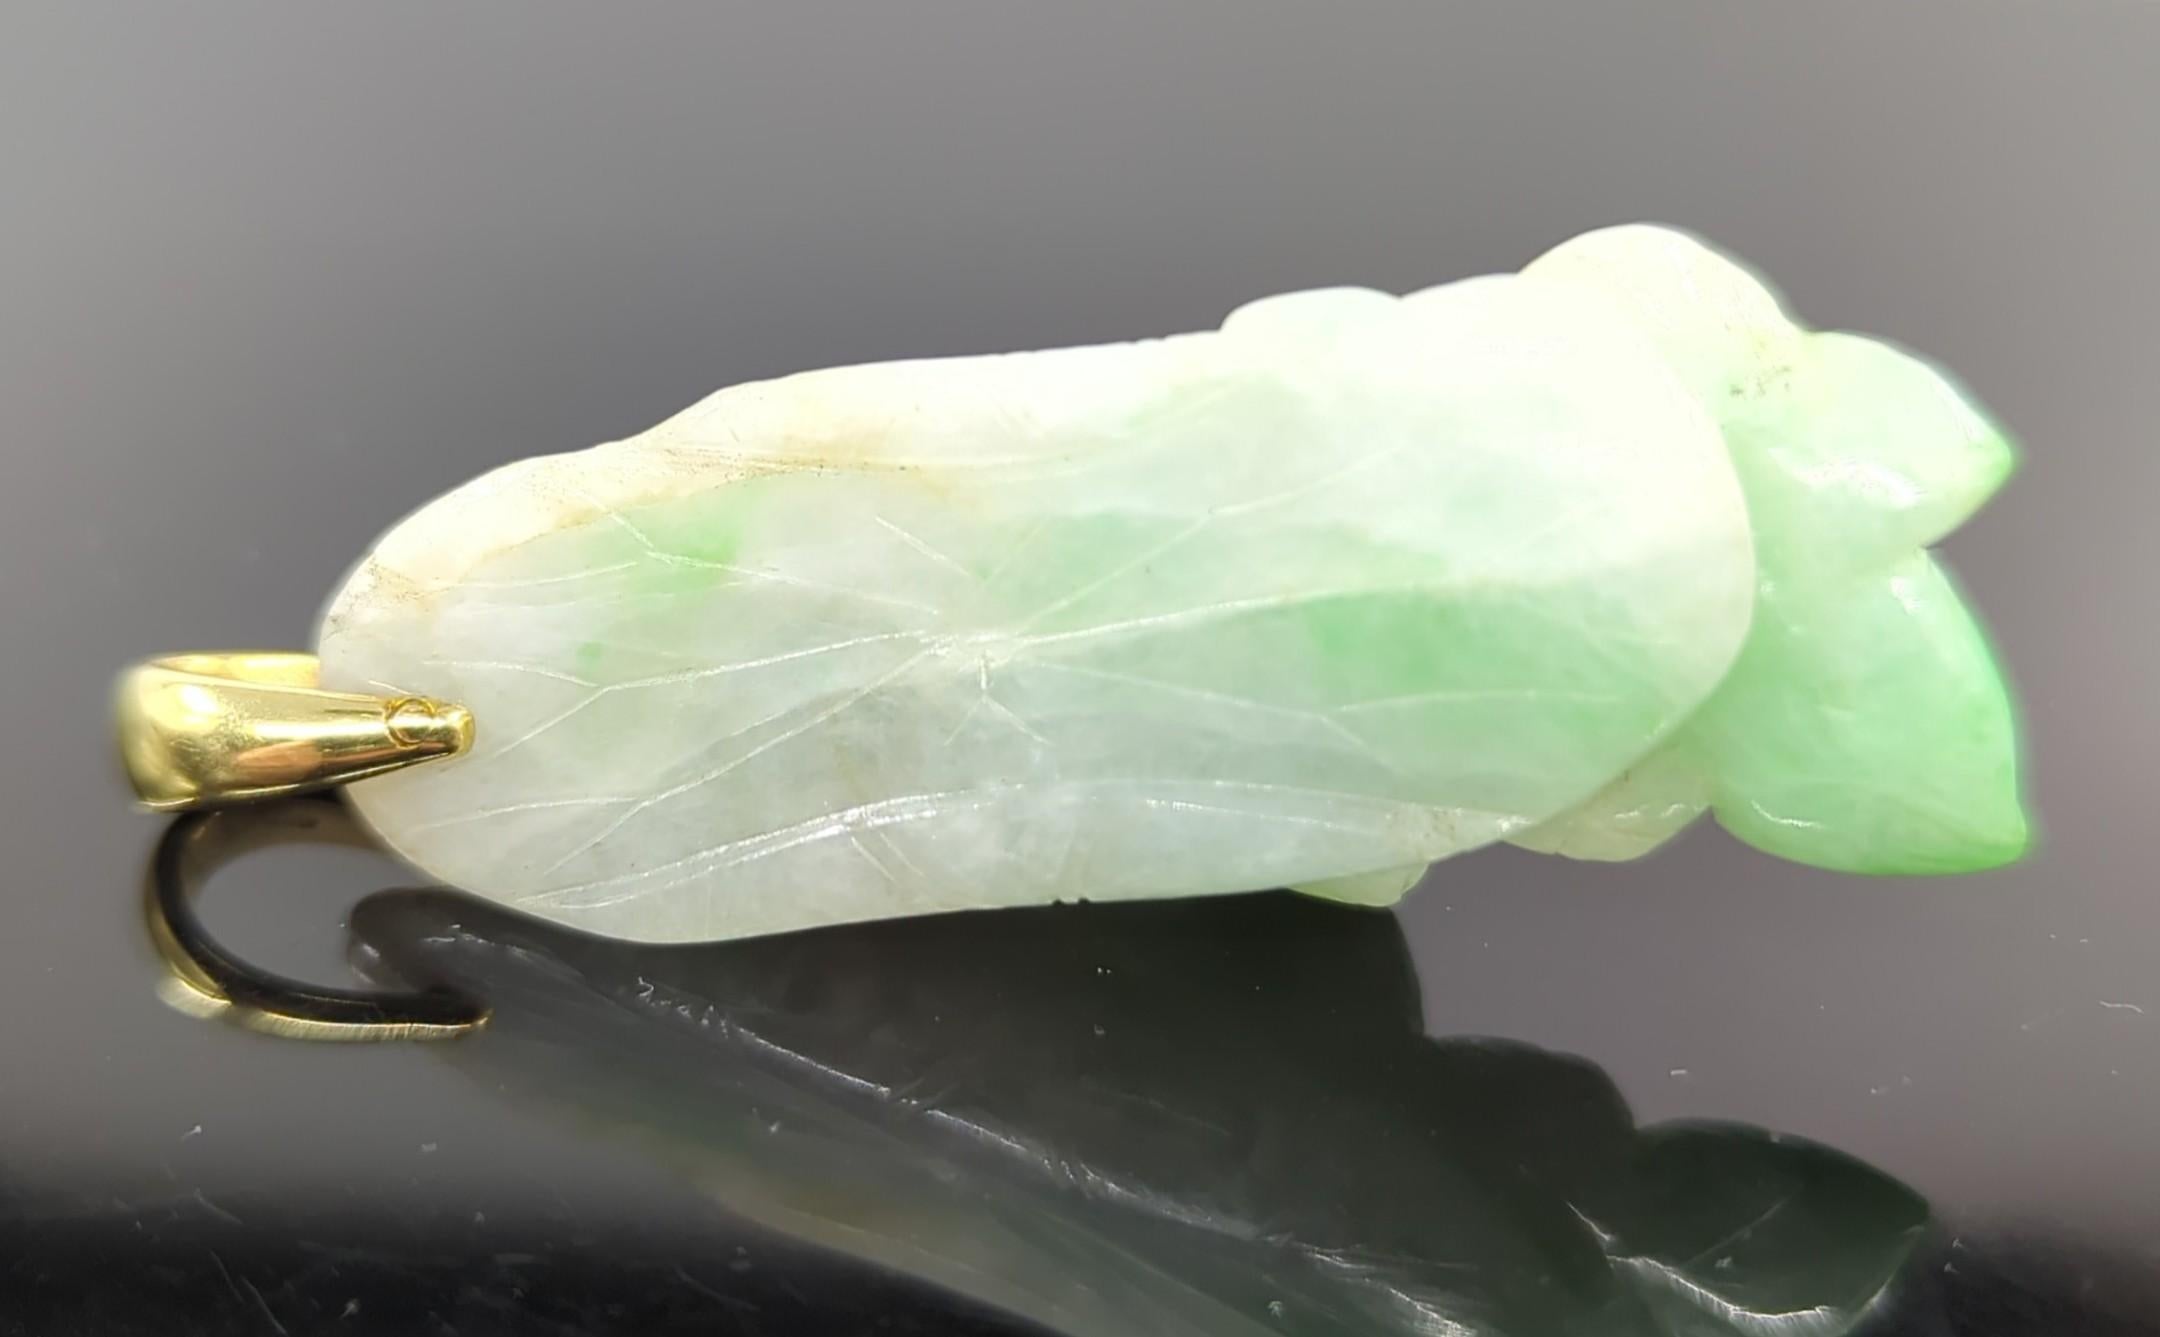 Chinese jadeite pendant, hand carved in the form of a lotus blossom in the front, and back carved with a lotus leaf with curling edges. 

The jadeite carving is 19th century or earlier, and untreated with natural apple green color inclusions.

The